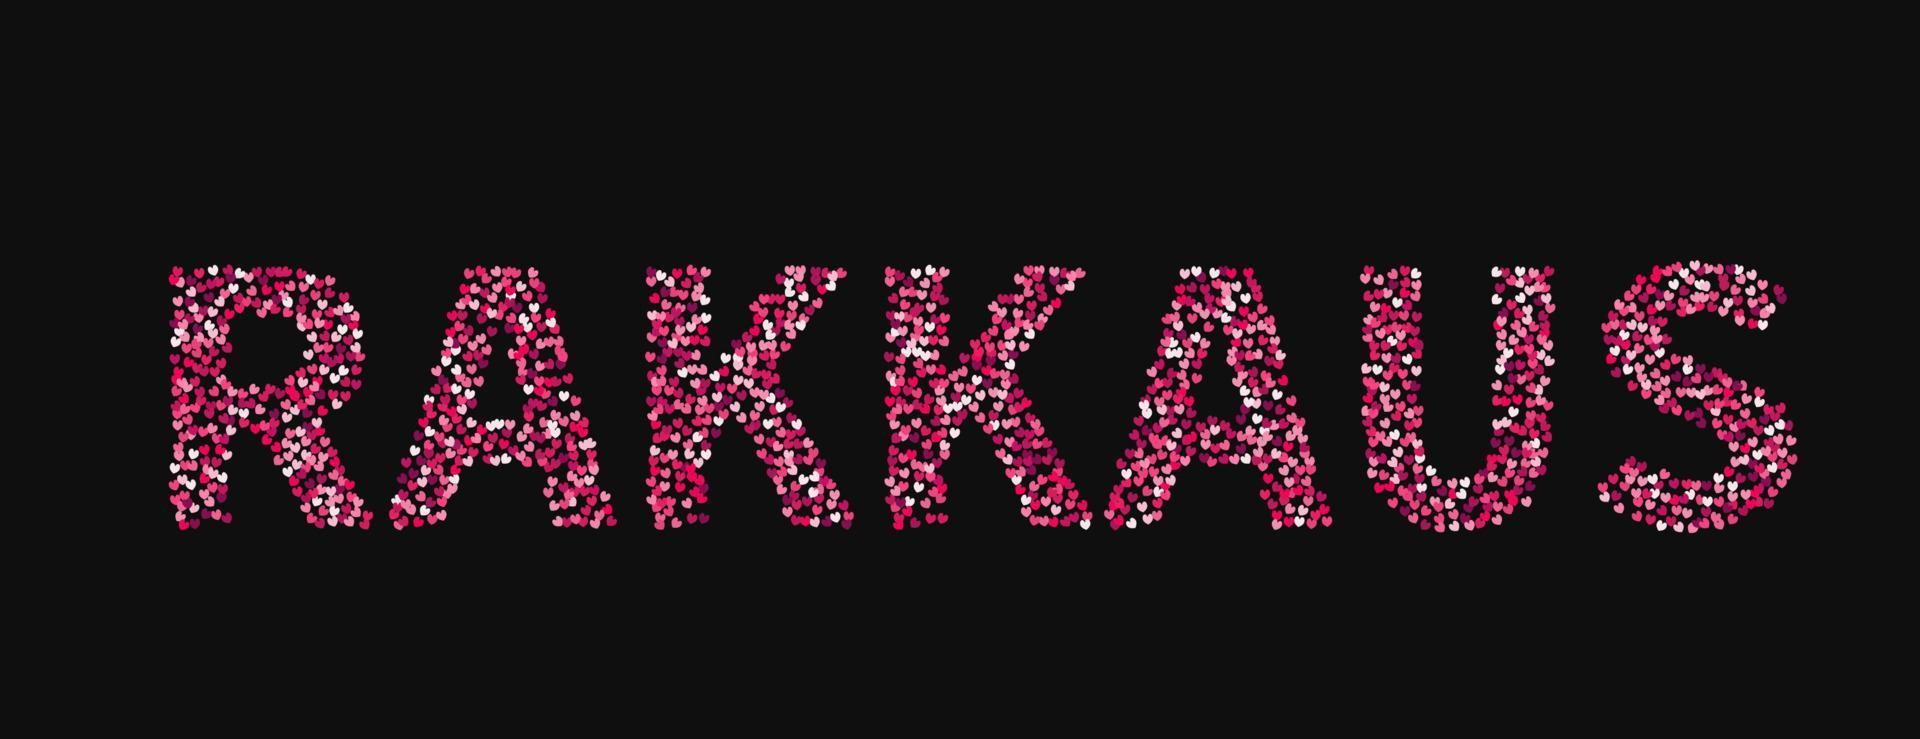 The word Rakkaus made of little hearts shades of red and pink on black background. Love in Finnish language. Valentine s day typography poster. Vector illustration. Easy to edit template.